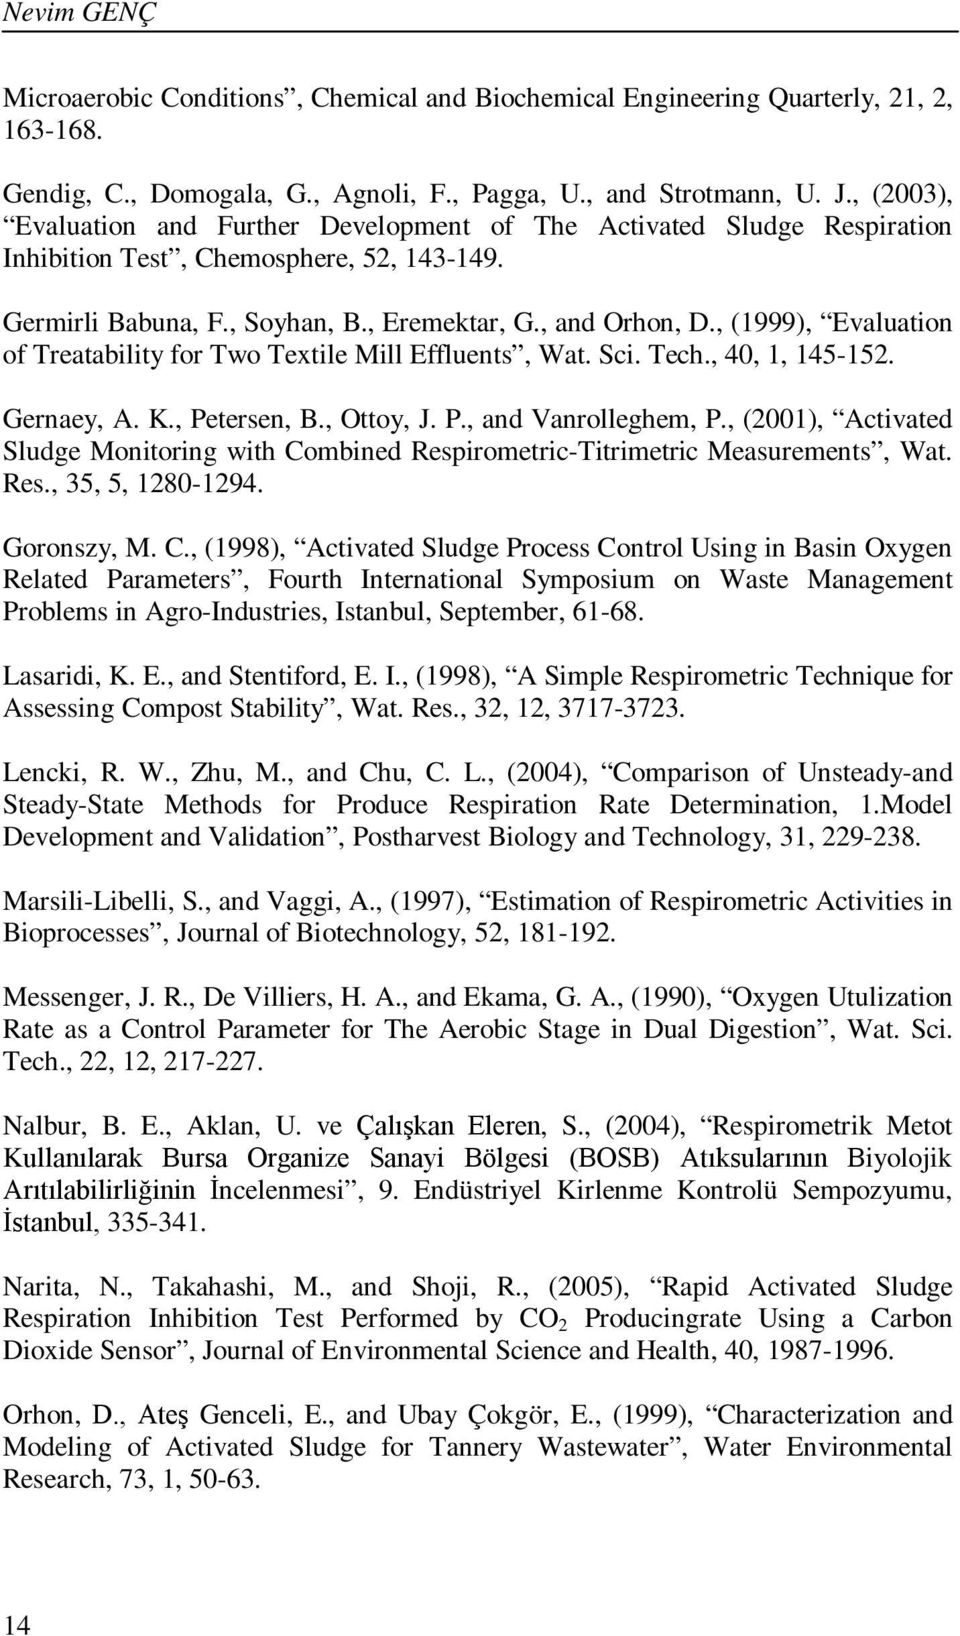 , (1999), Evaluation of Treatability for Two Textile Mill Effluents, Wat. Sci. Tech., 40, 1, 145-152. Gernaey, A. K., Petersen, B., Ottoy, J. P., and Vanrolleghem, P.